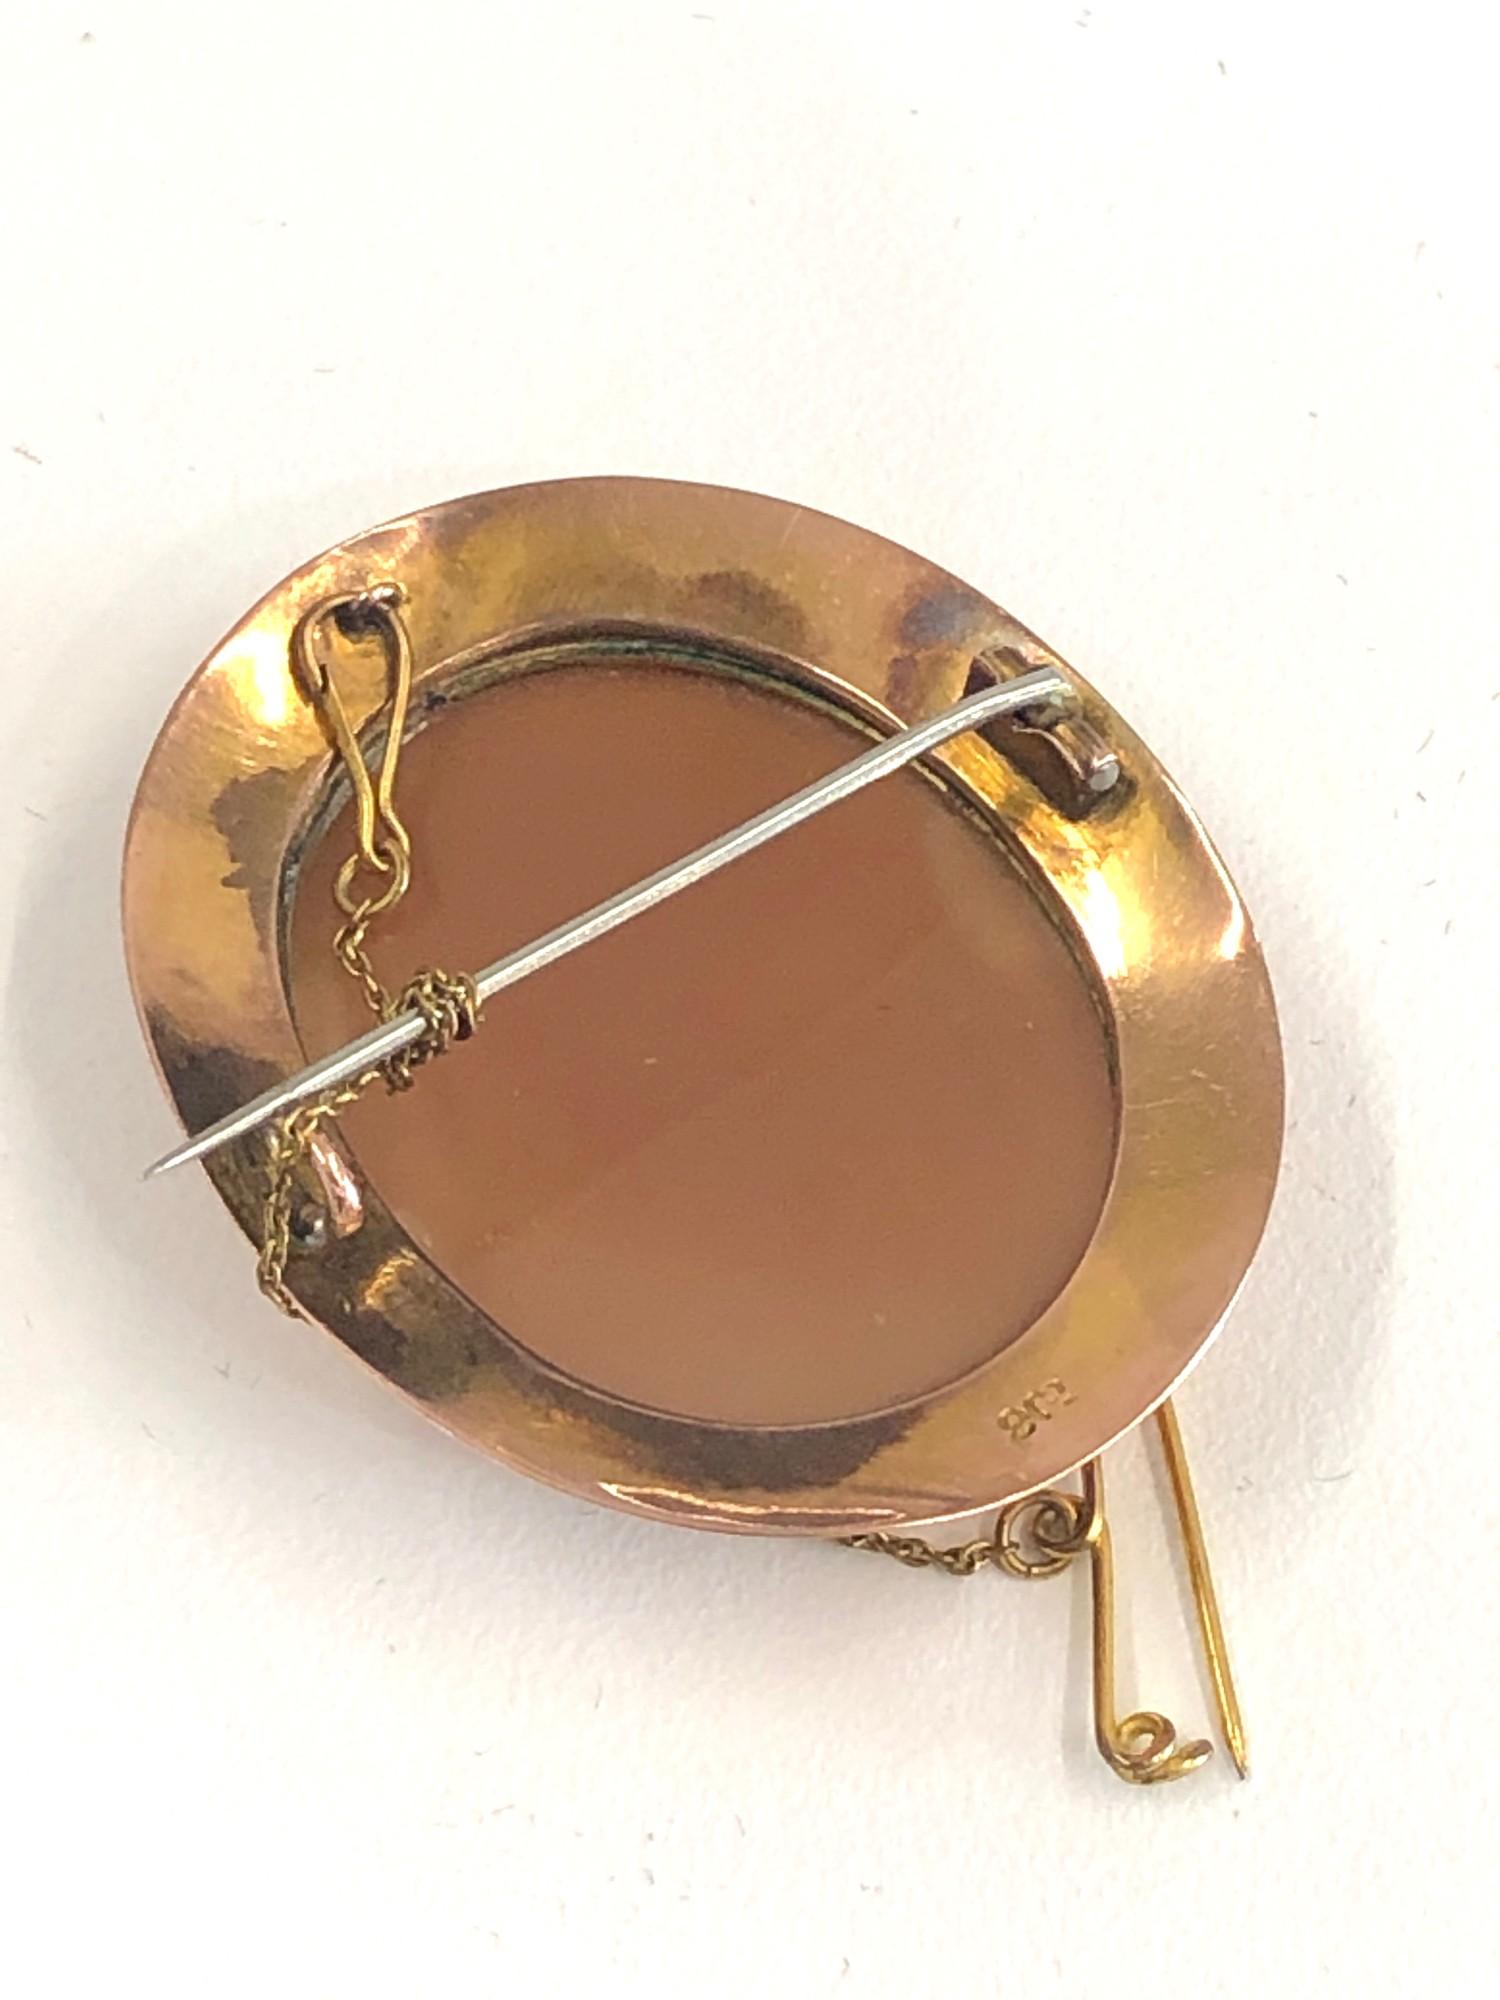 Vintage 9ct gold cameo brooch measures approx 4cm by 3.5cm weight 7.53g - Image 2 of 2